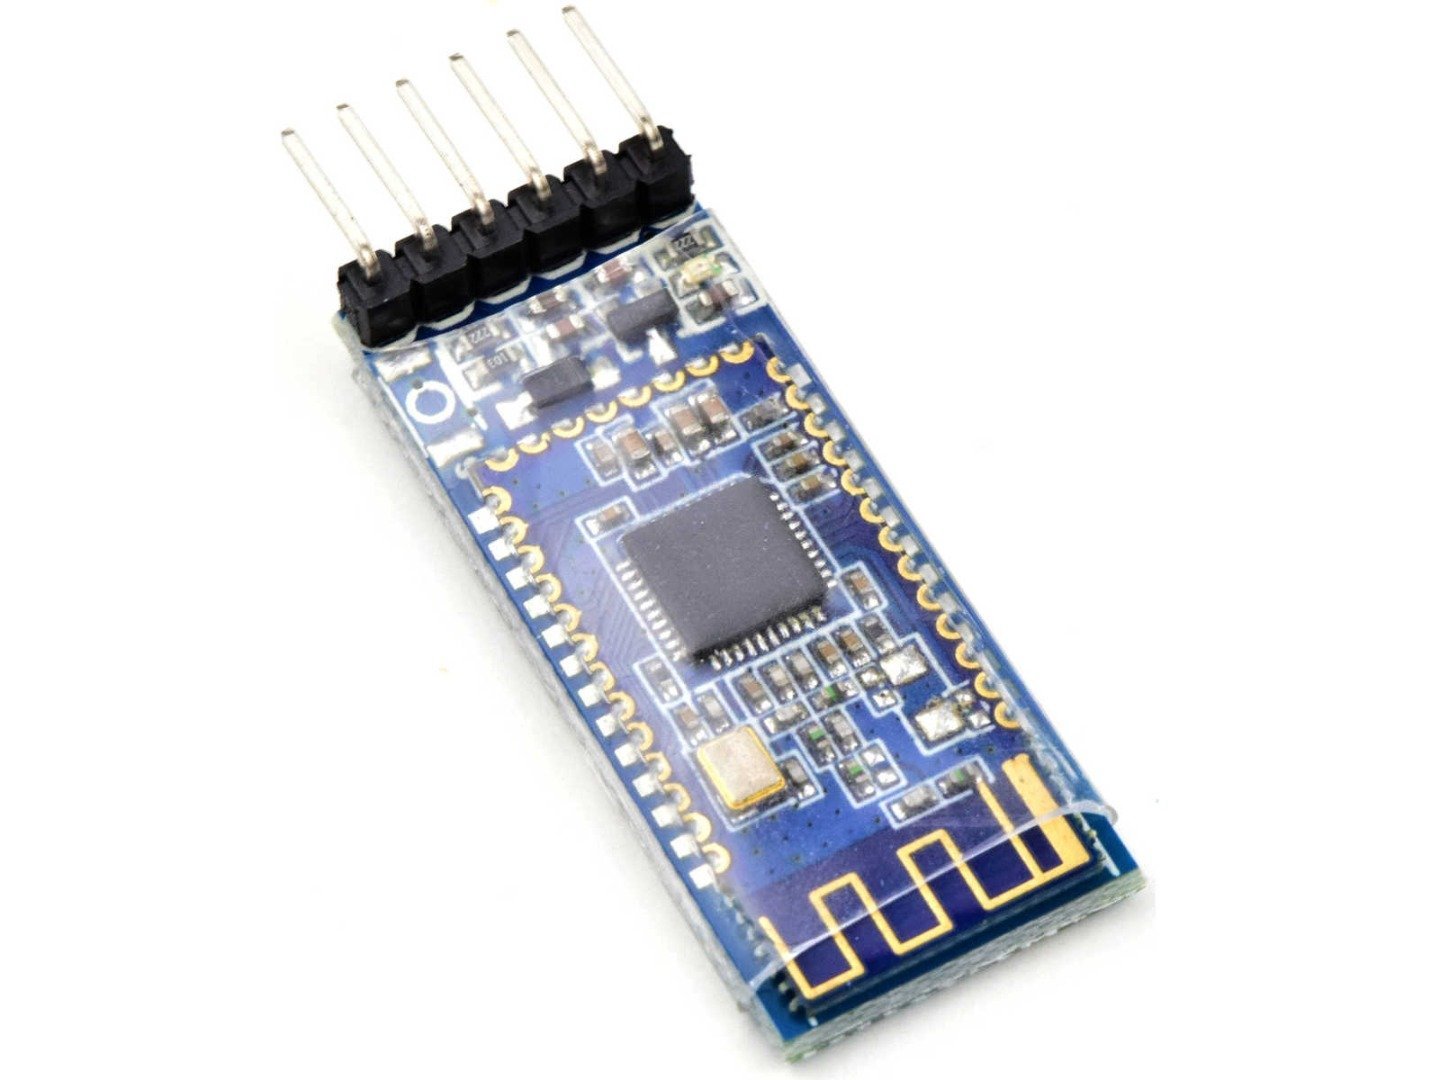 HC-10 Bluetooth 4.0 BLE Module with TI CC2541 chipset 7